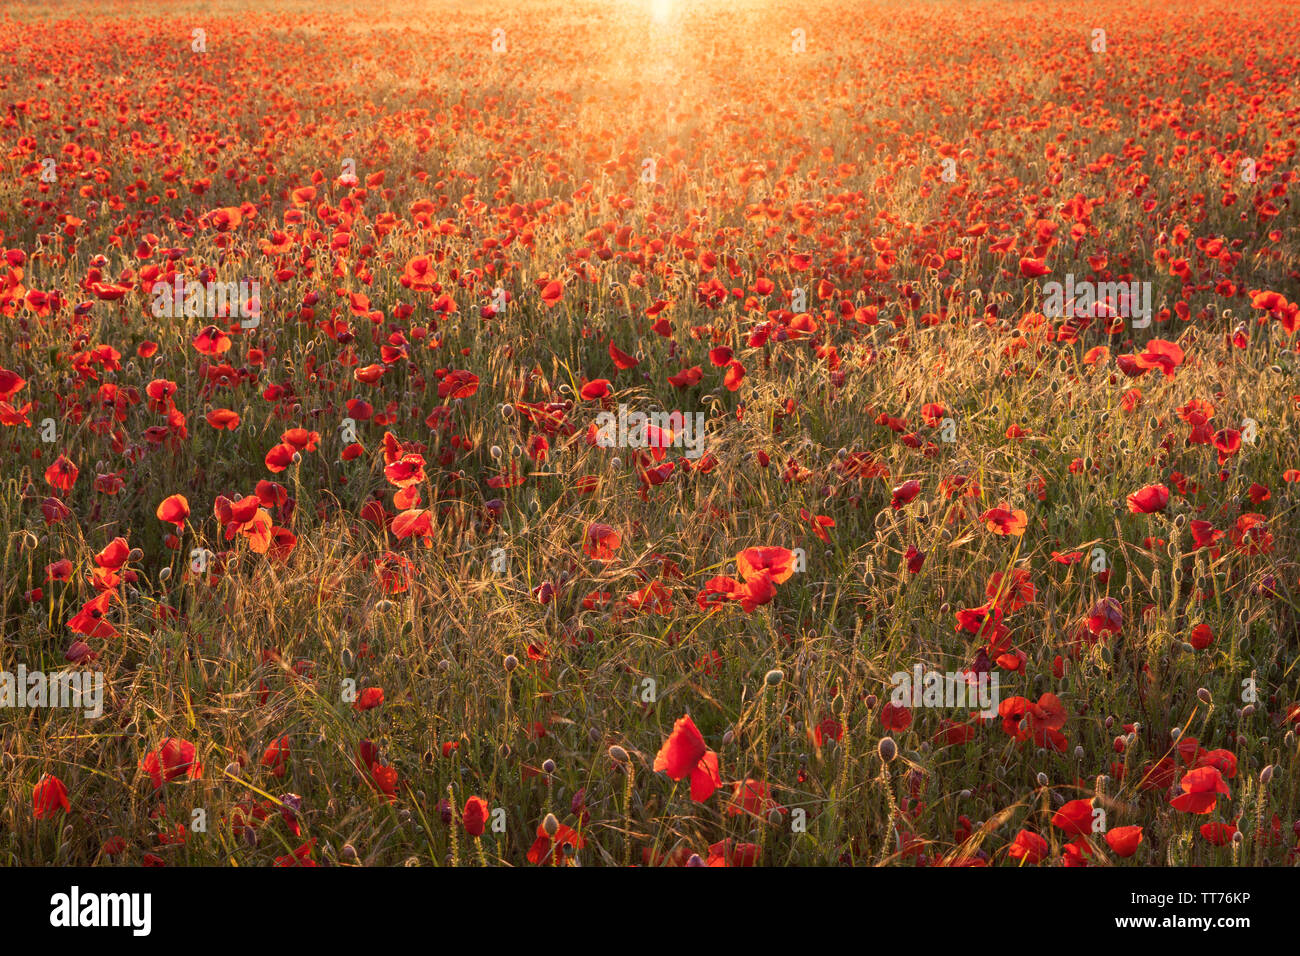 Scotter, Lincolnshire, UK. 15th June, 2019. UK Weather: A field of Poppies at first light in Lincolnshire. A bright and dry morning, after days of rain caused flooding in parts of the county. Scotter, Lincolnshire, UK. 15th June 2019. Credit: LEE BEEL/Alamy Live News Stock Photo